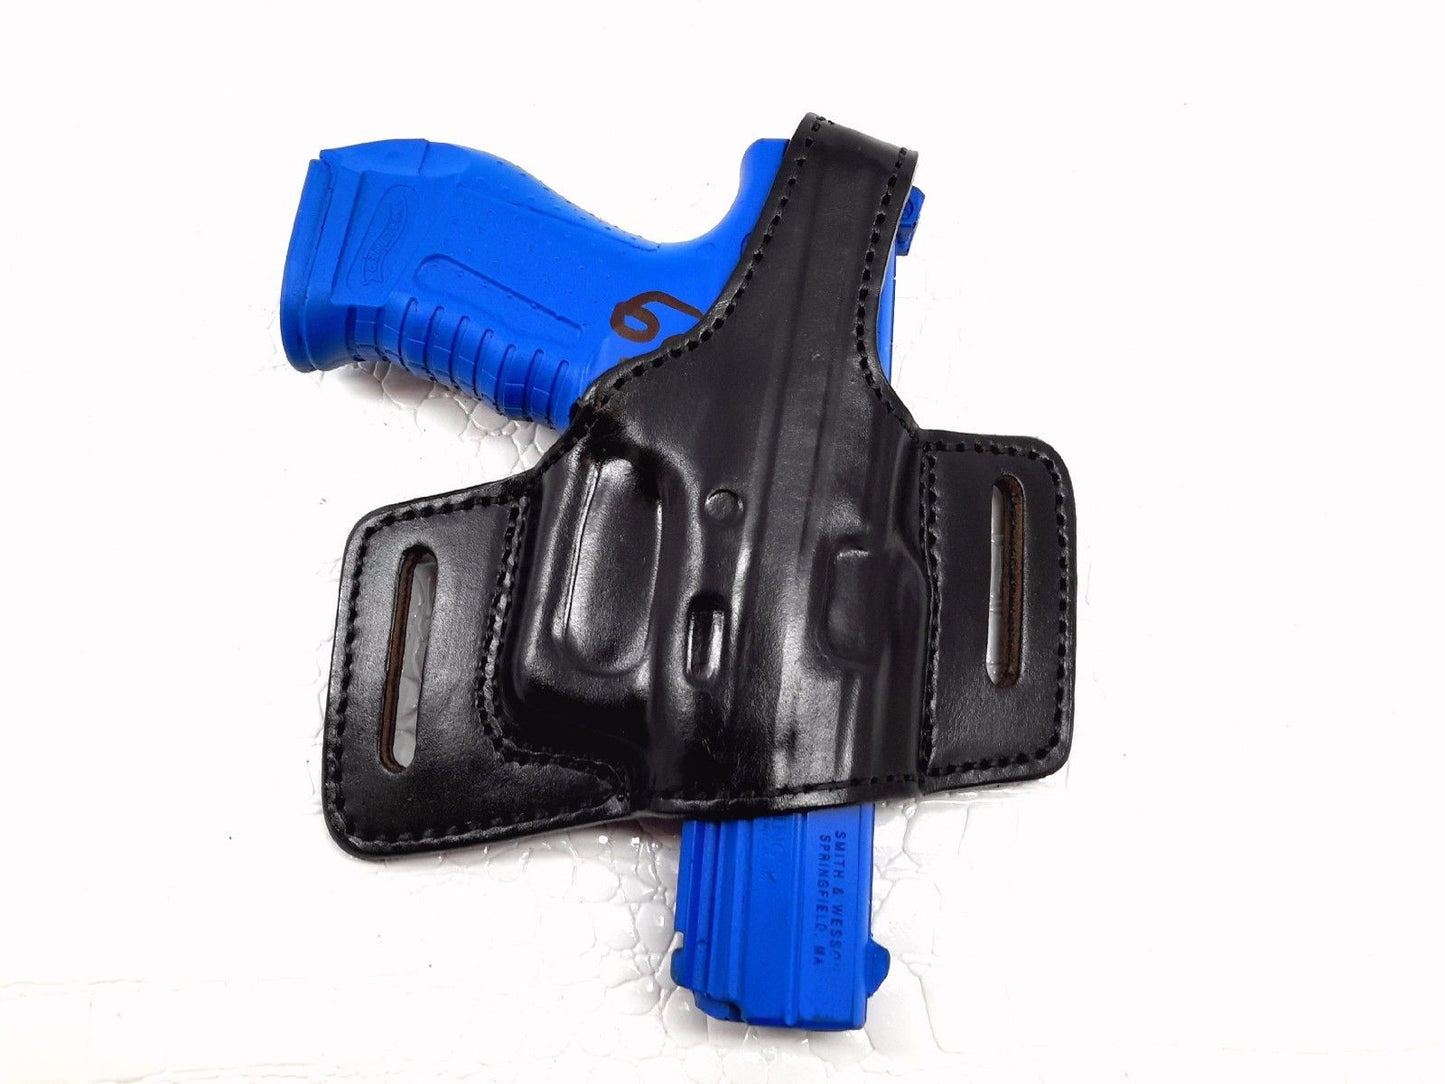 Thumb Break Belt Holster for Walther P99 , MyHolster